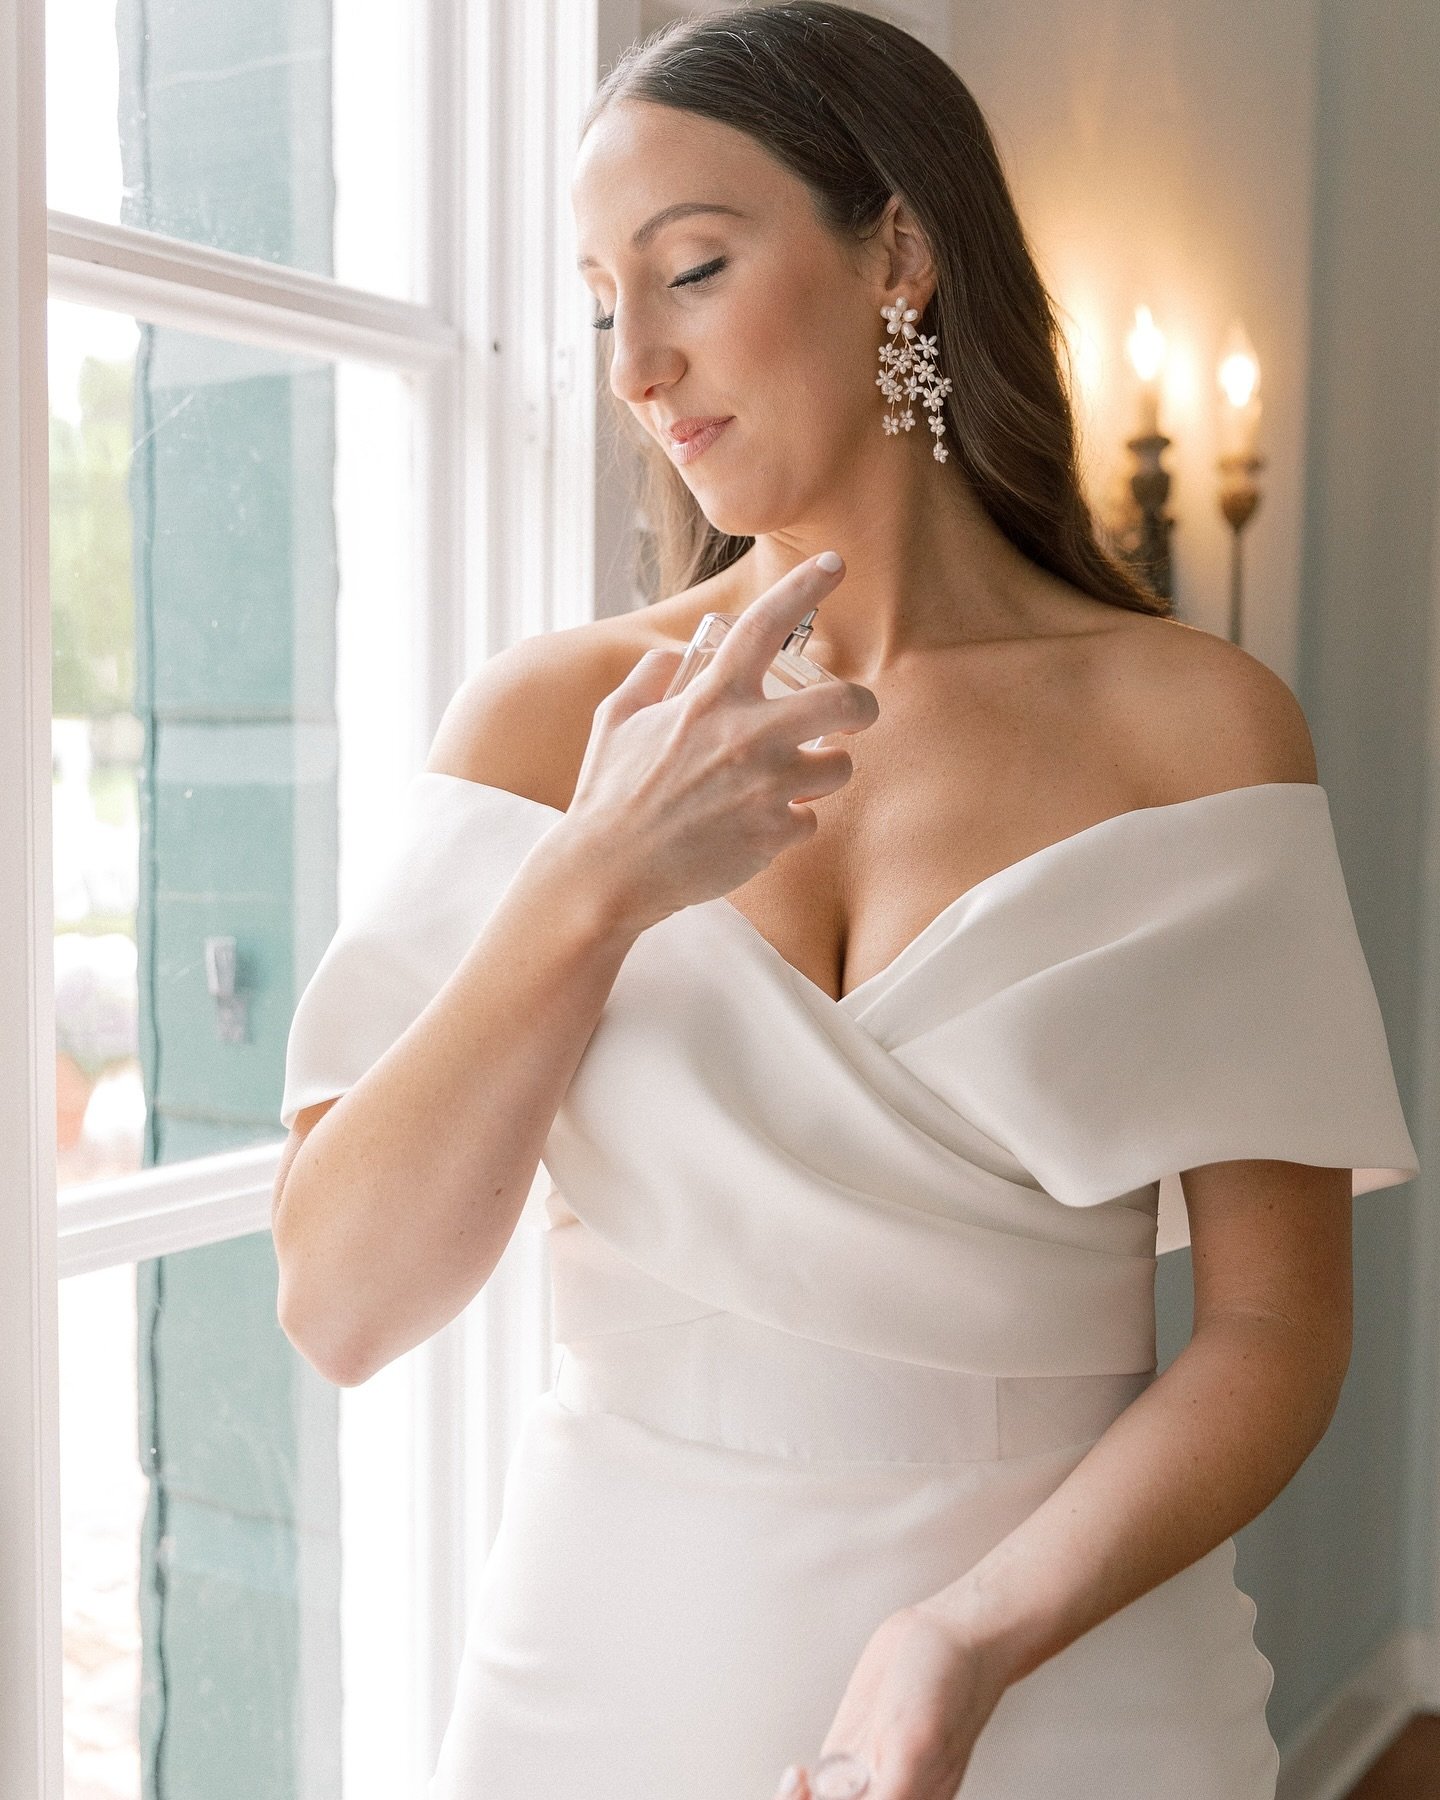 Classic Bridal Beauty. A neutral color palette. A matte eye subtly enhanced. Soft skin. 

Photo Description: Bride Kailey adds the finishing touch to her bridal beauty look. 

Photo @studiomagnoliawed 

#classicbride #elevatedbeauty #bridalbeauty #lo